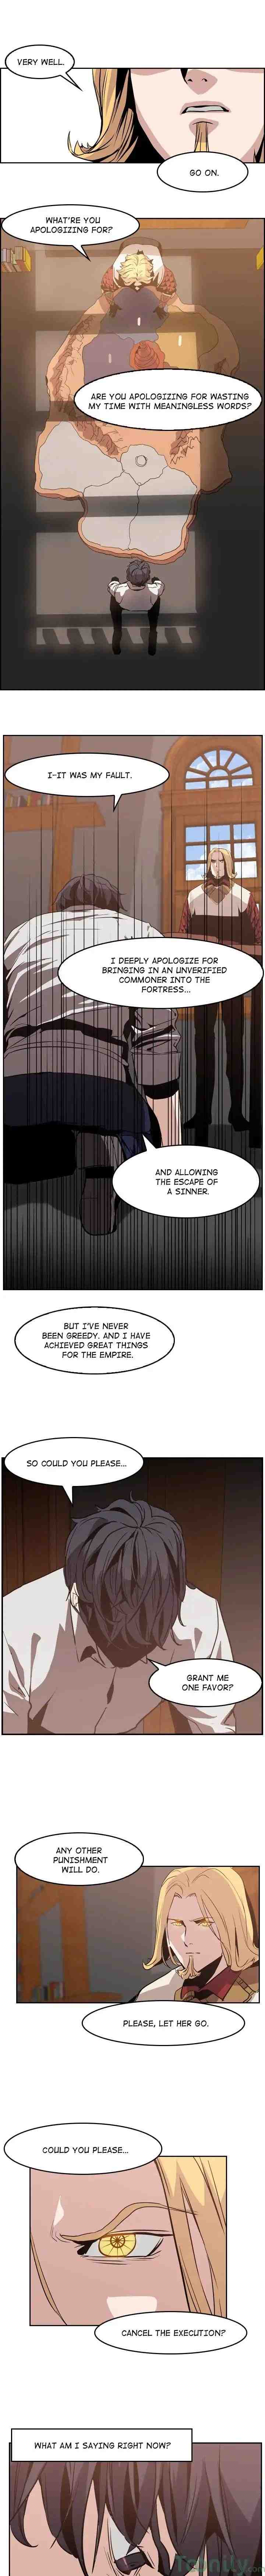 PAINKILLER - Chapter 8 Page 1